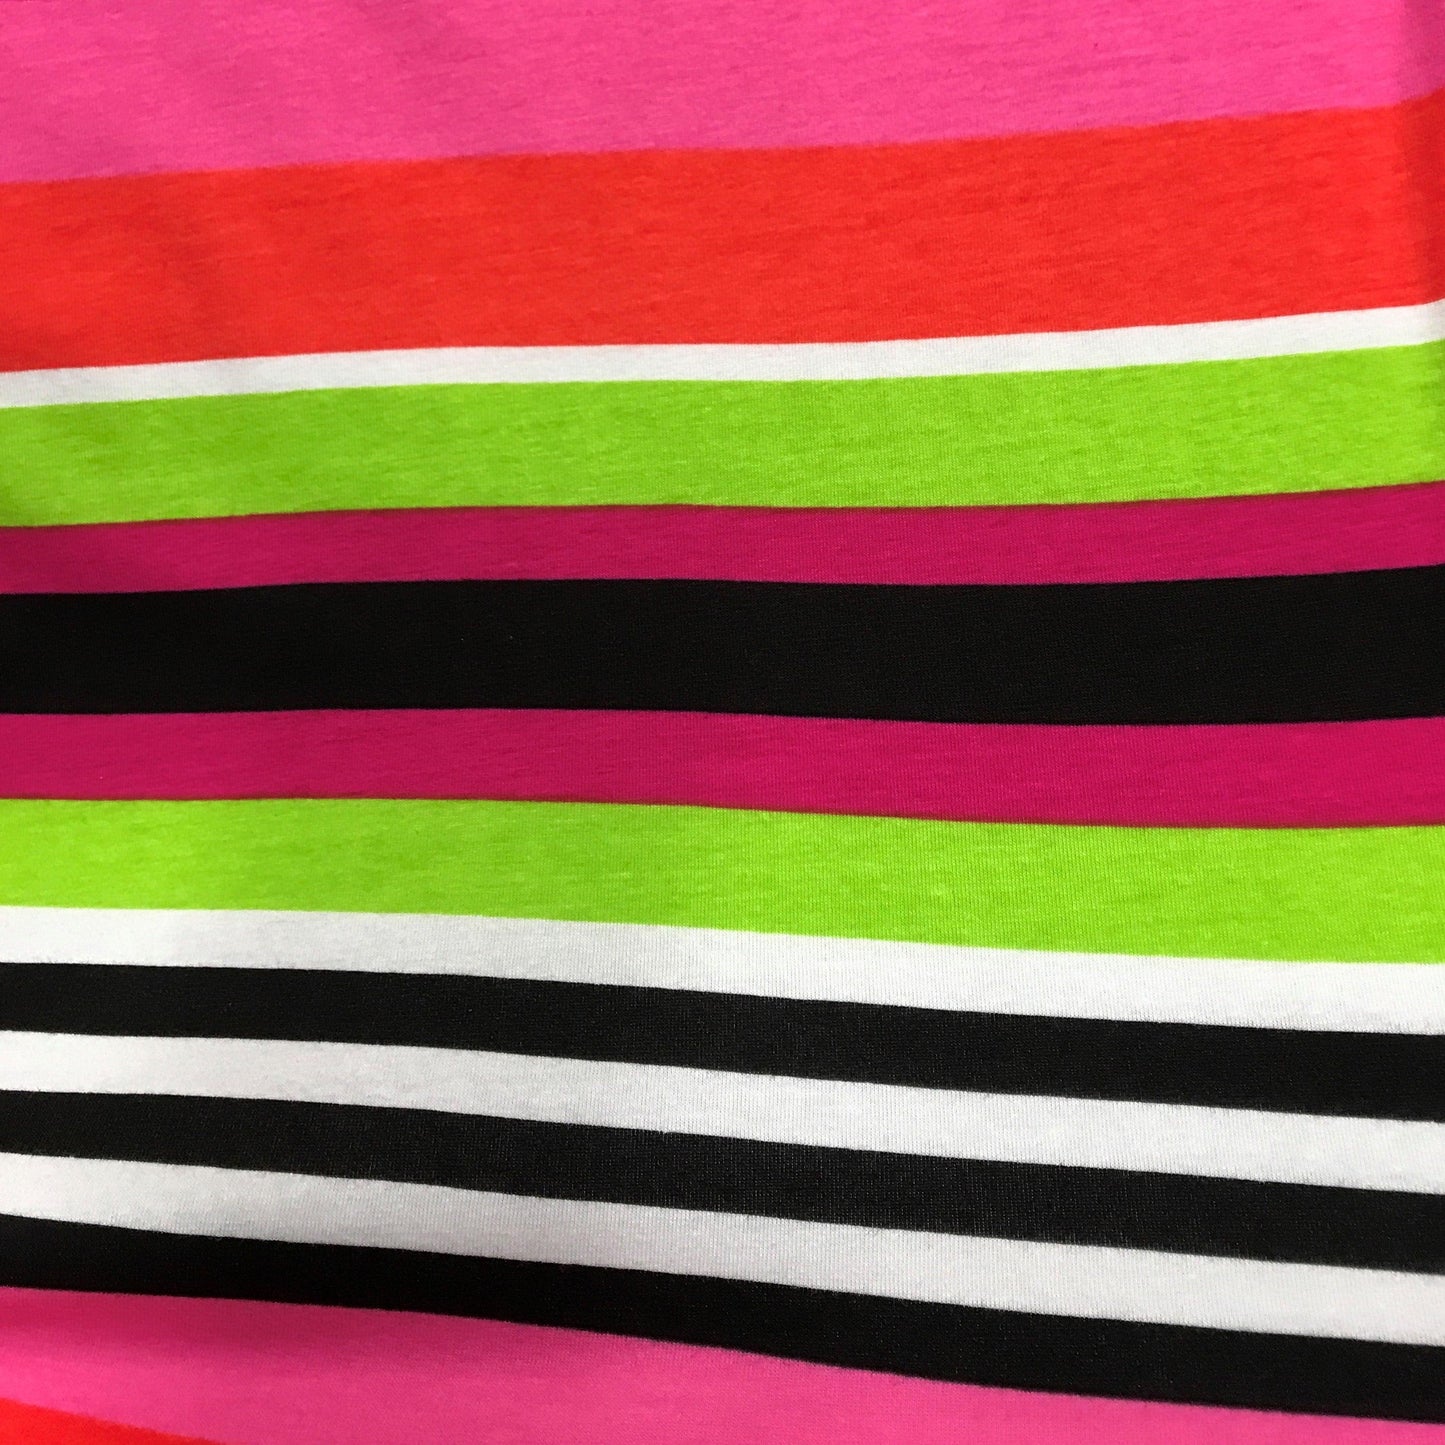 Pink, Green, White and Black Stripes on Cotton/Spandex Jersey